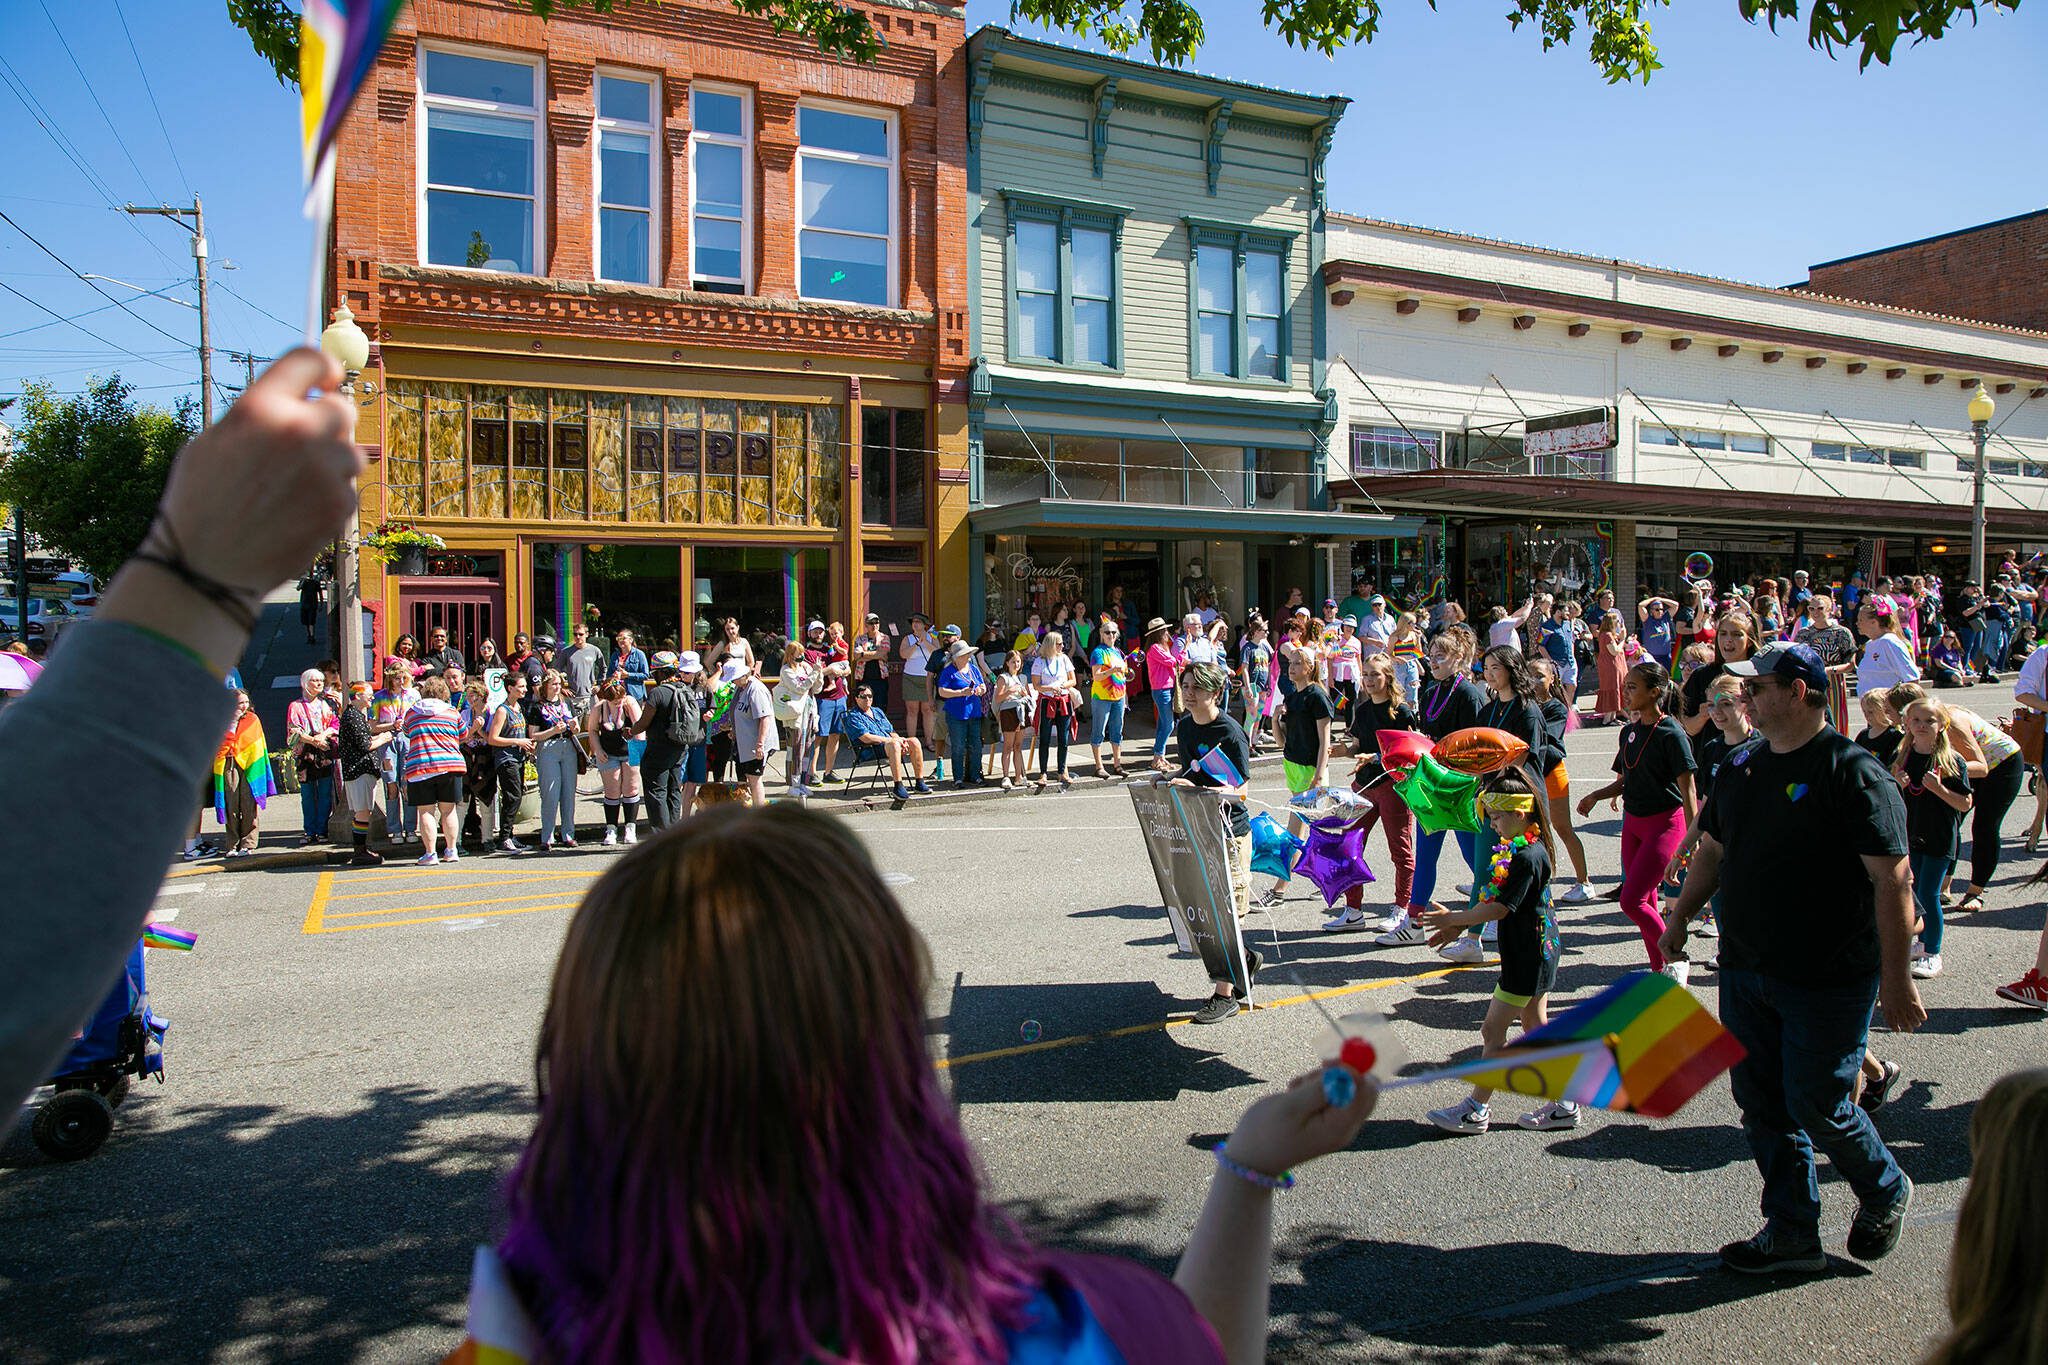 Hundreds line the streets during Snohomish’s inaugural Pride celebration on Saturday, June 3, 2023, in downtown Snohomish, Washington. (Ryan Berry / The Herald)